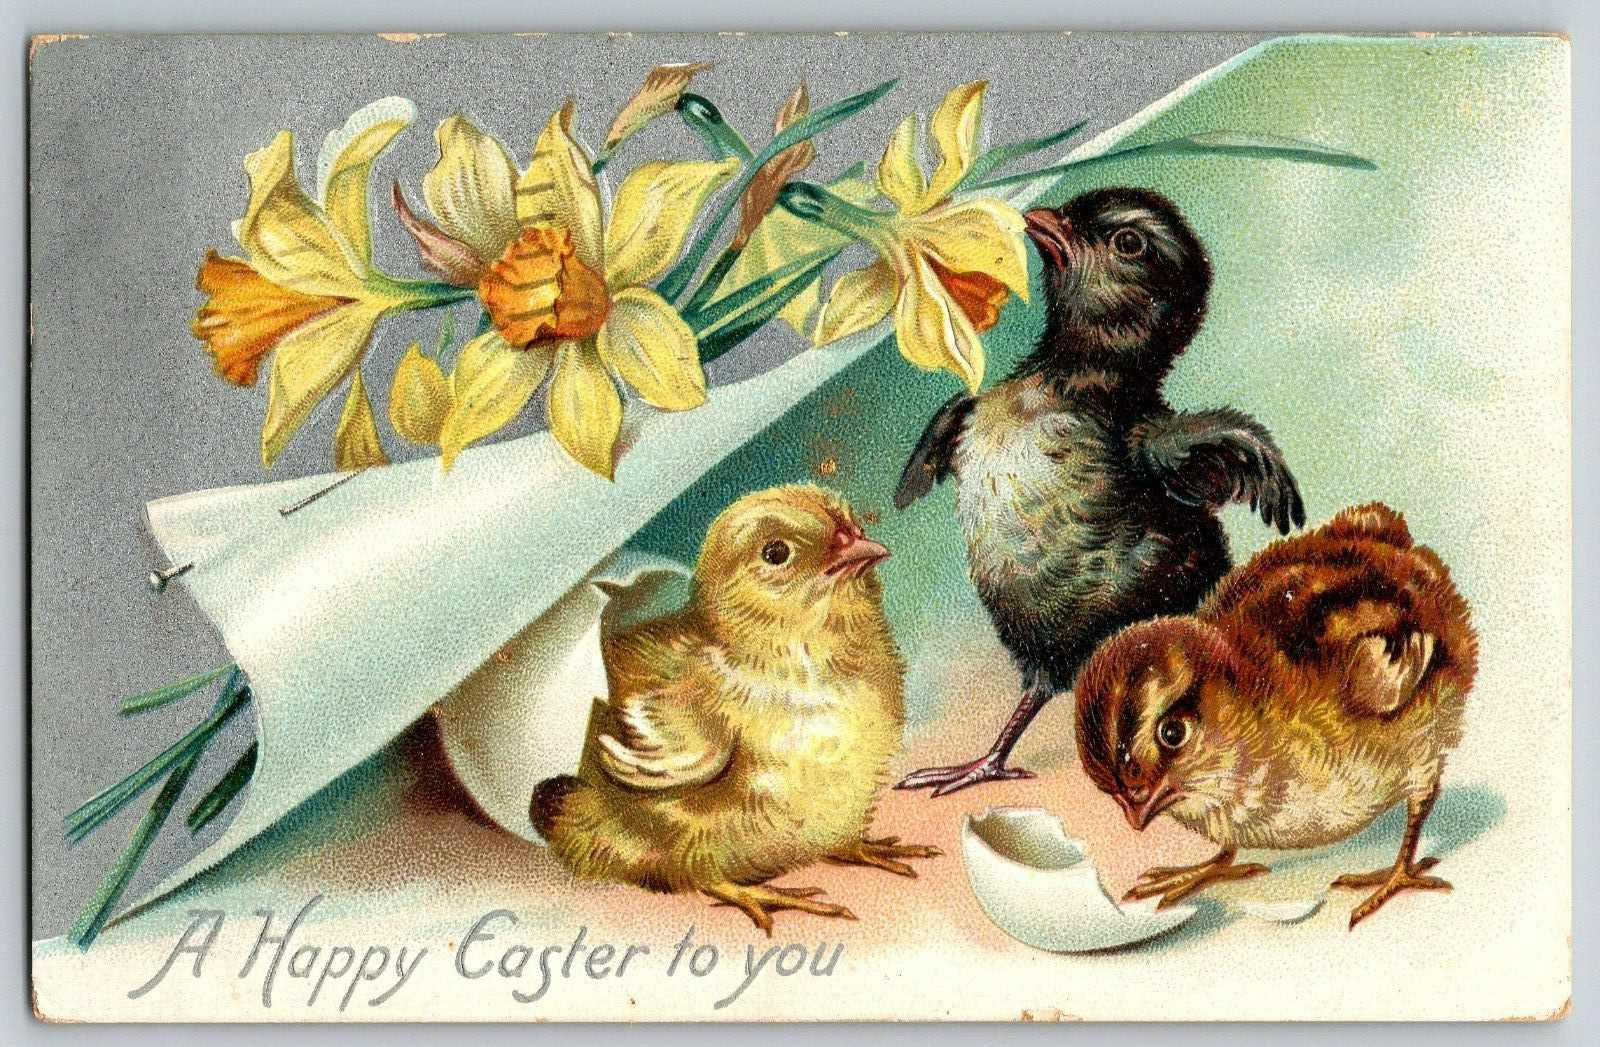 A Happy Easter To You - Flowers, Chicks in Eggshell - Tuck Postcard, Posted